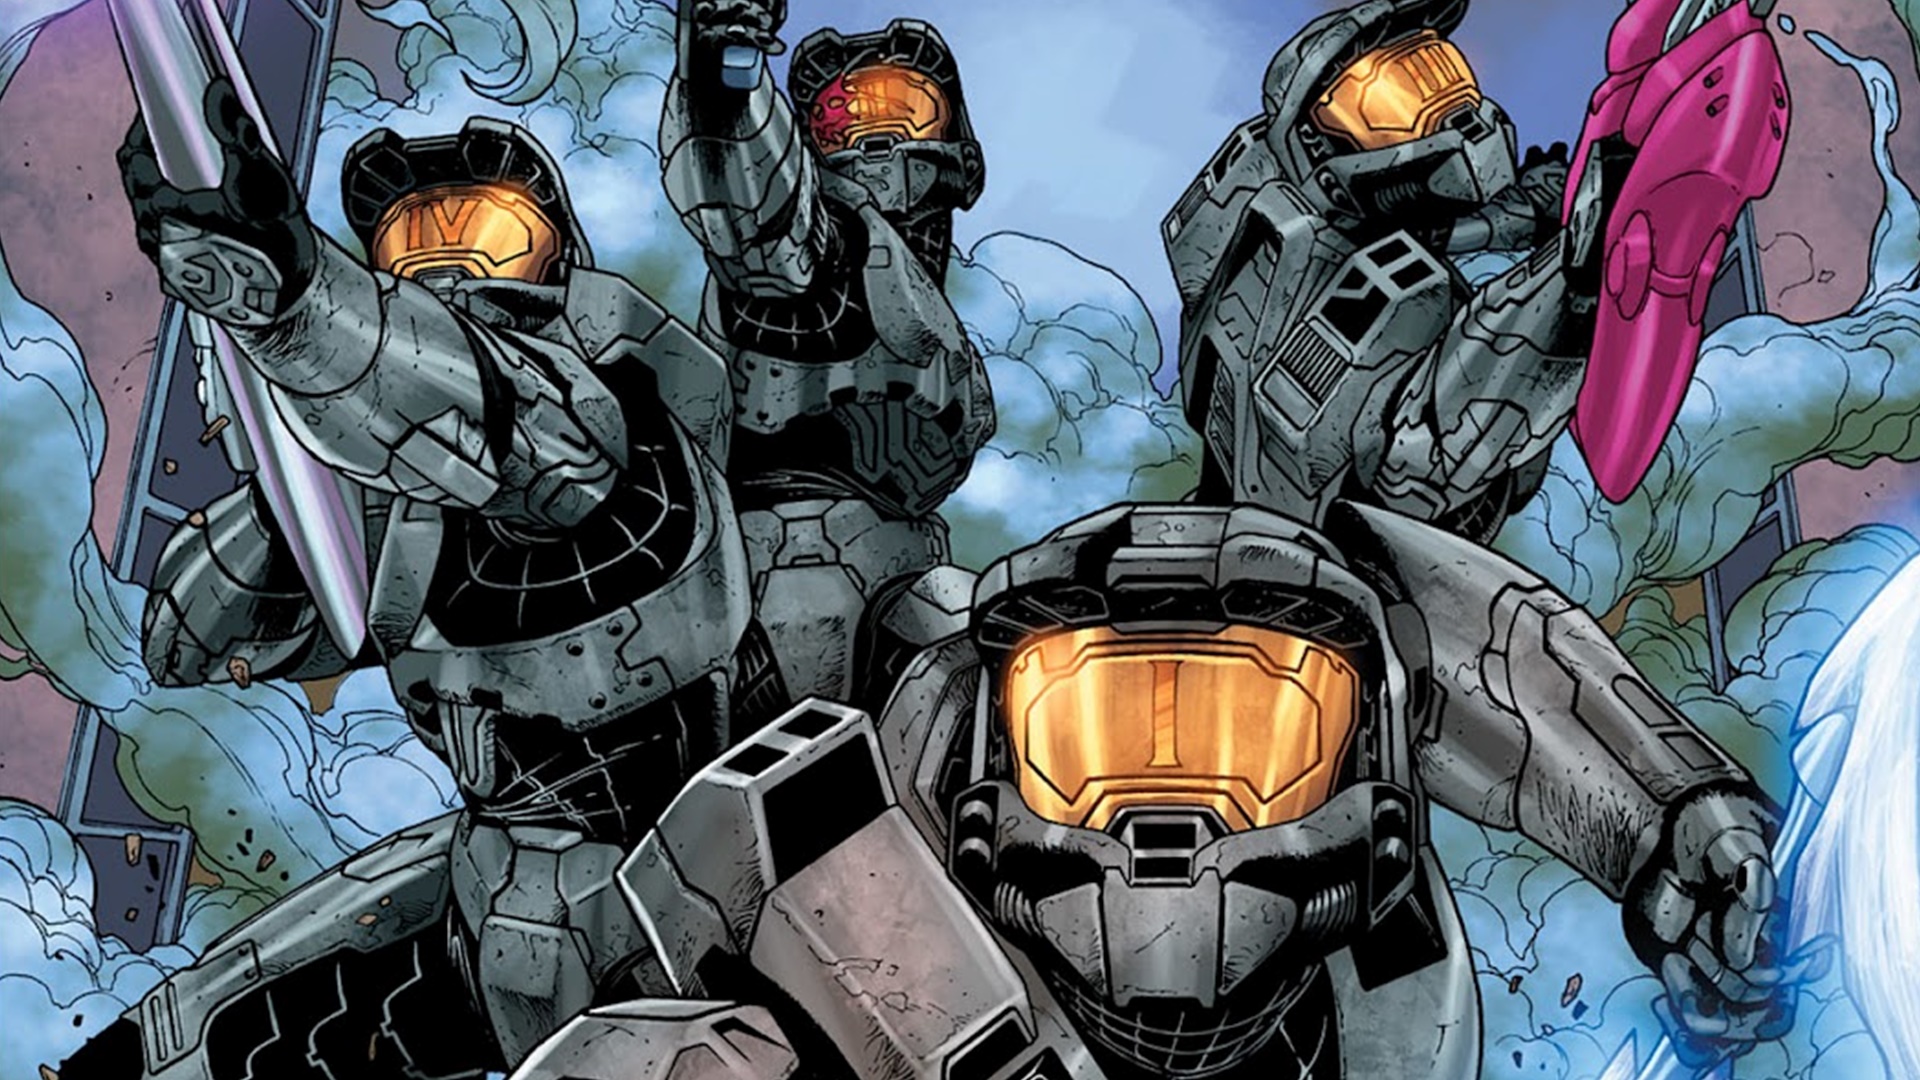 Crop of a panel from Halo: Blood Line showing the four Spartans of Black Team